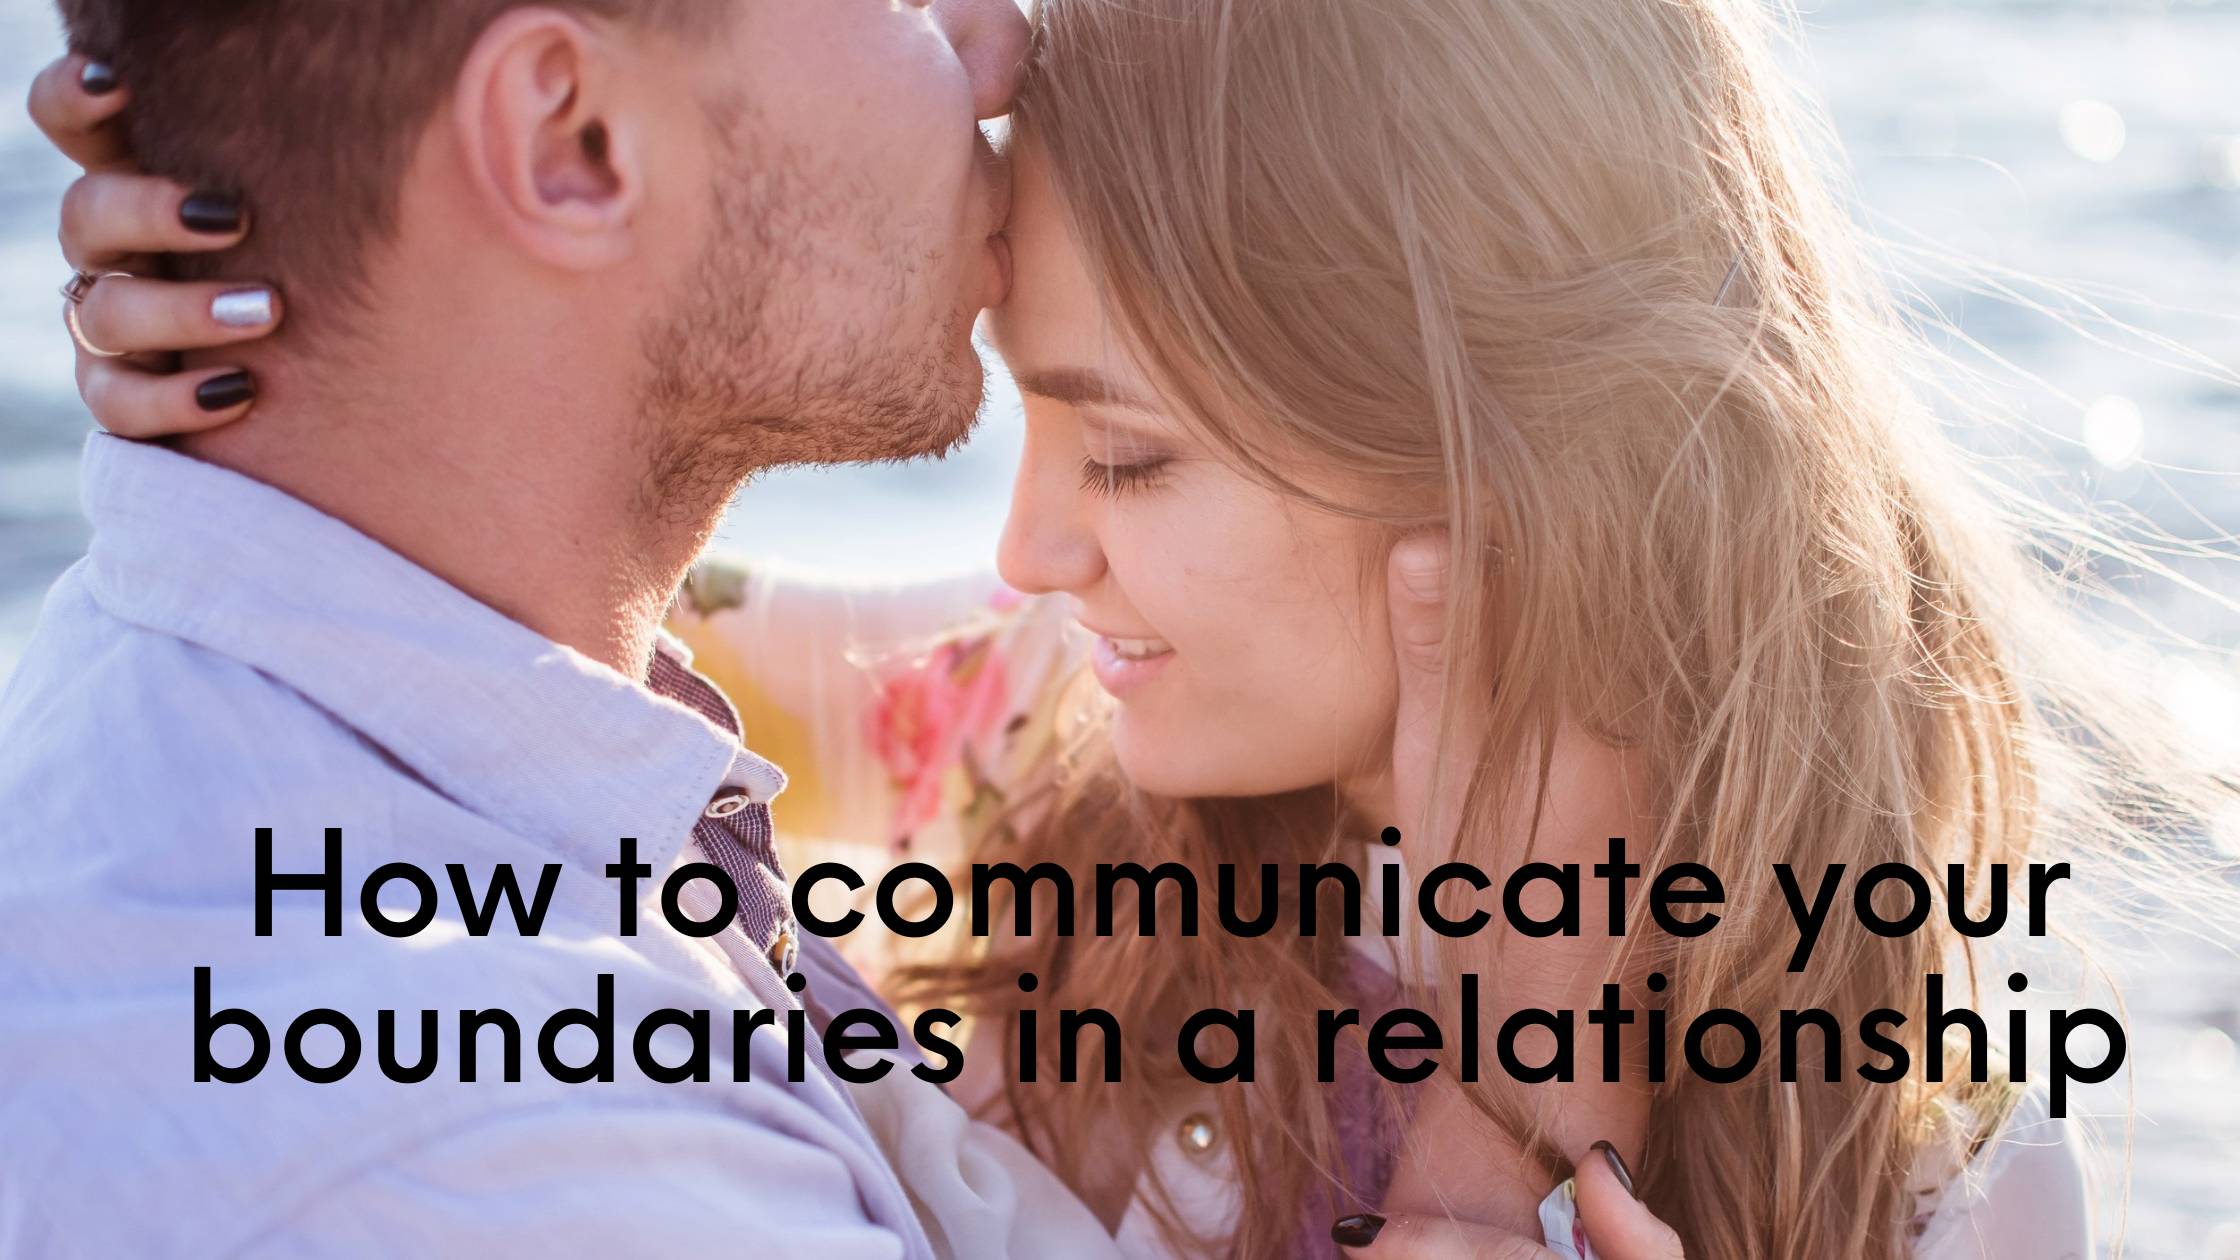 6 Smart Ways to Communicate Your Boundaries in a Relationship 4